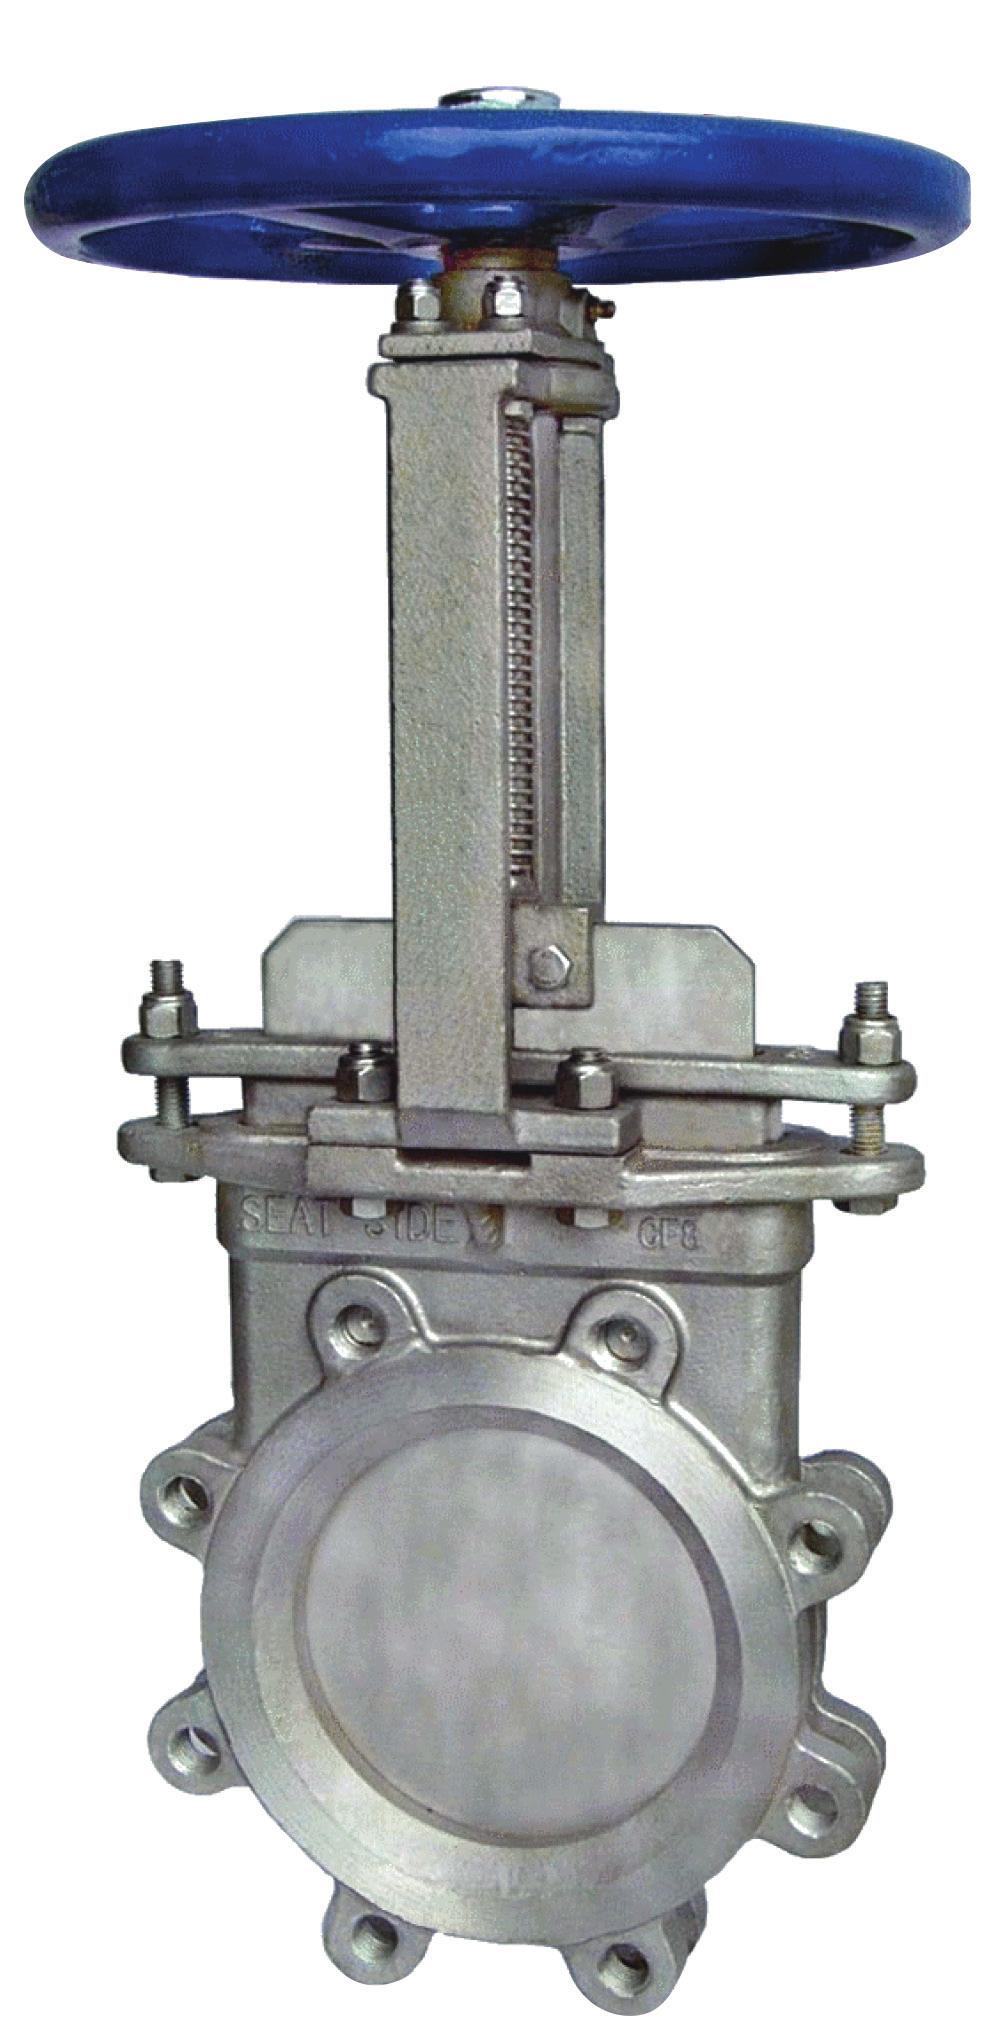 Figure 93 Stainless Steel Metal Seated Knife Gate Valve Cast stainless steel body, packing gland, and yoke. Heavy duty body designed to resist deflection from line loads and internal pressure.